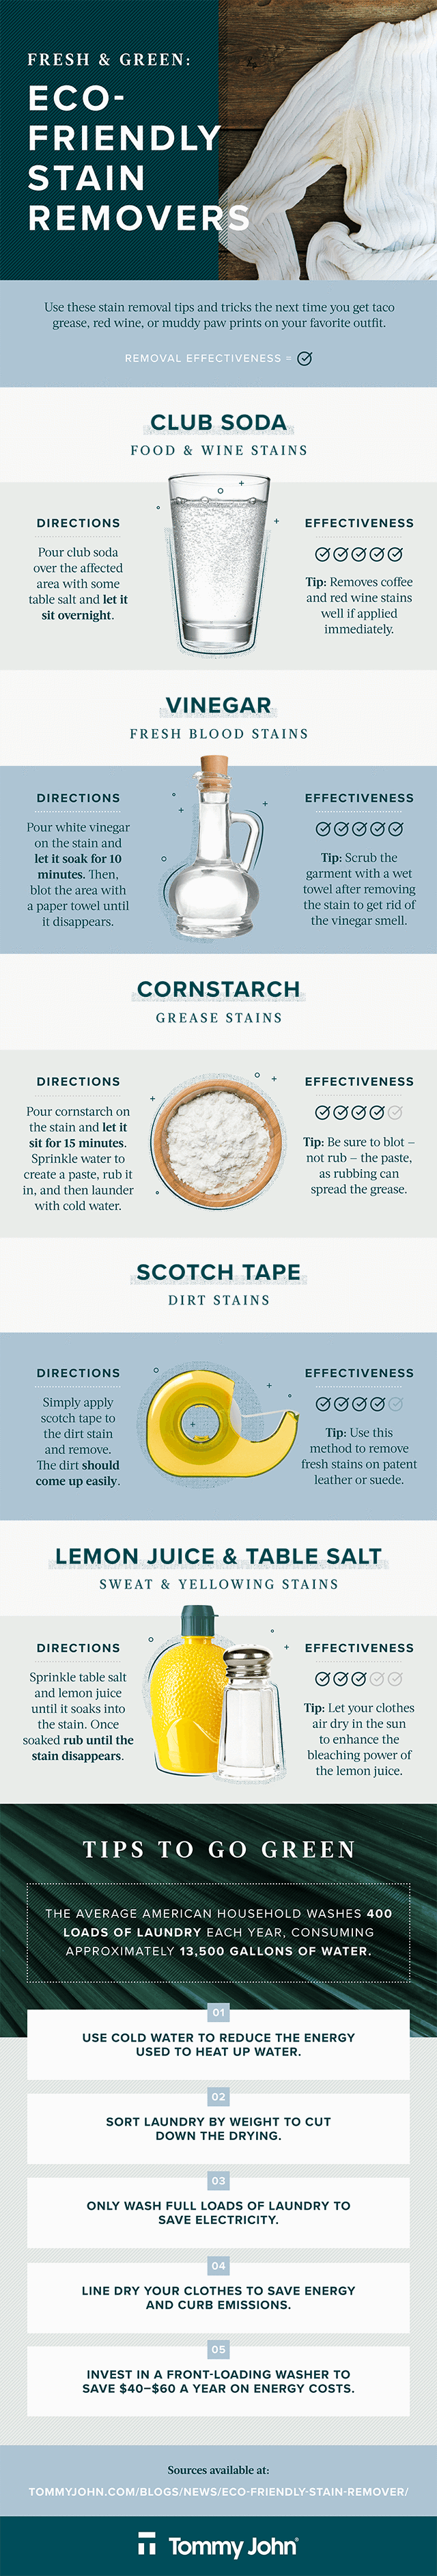 infographic: eco-friendly stain removers